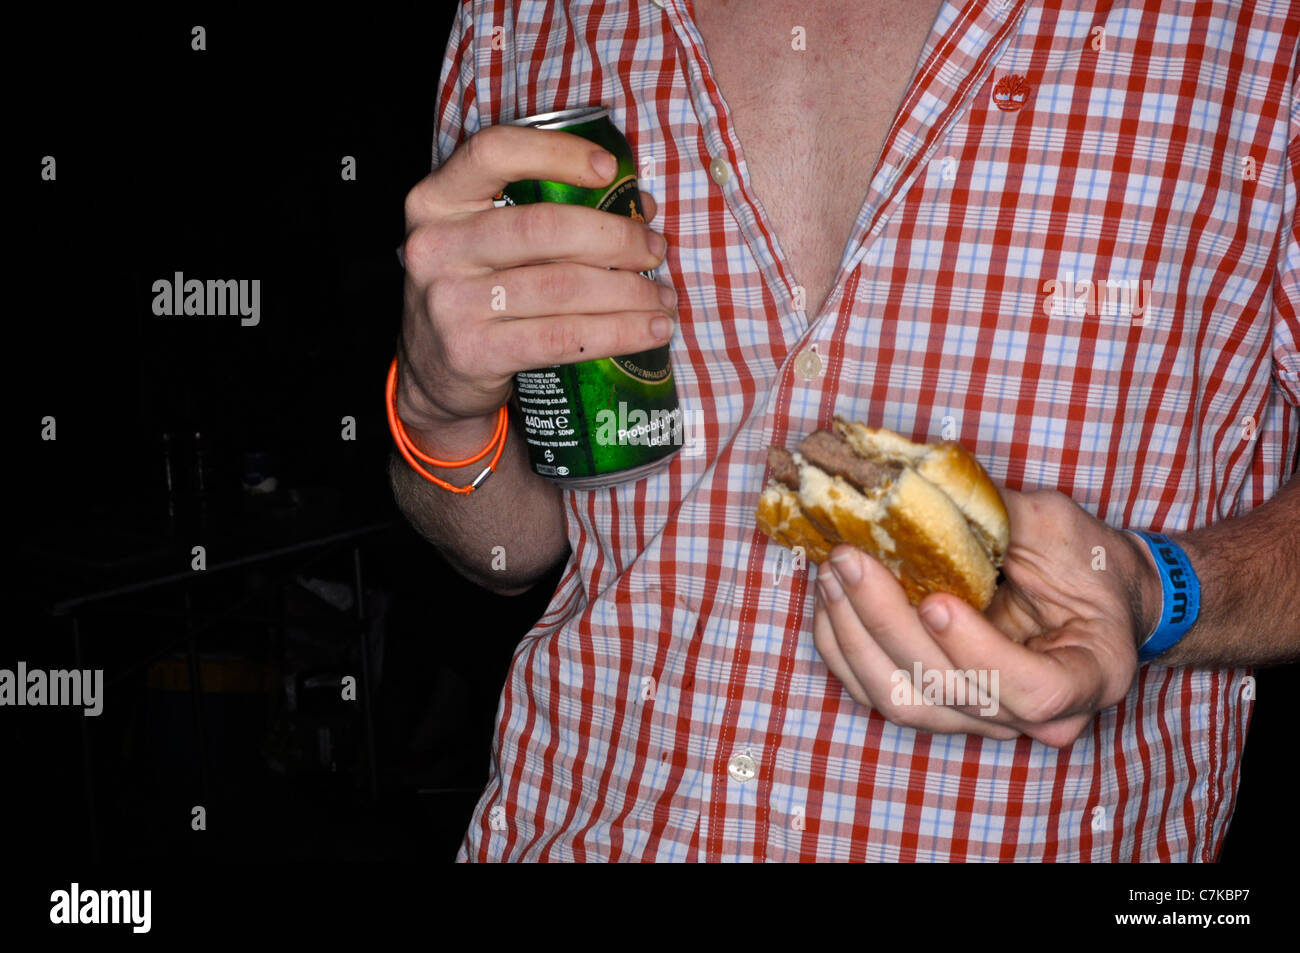 A party goer at a festival eating a burger and drinking a beer Stock Photo